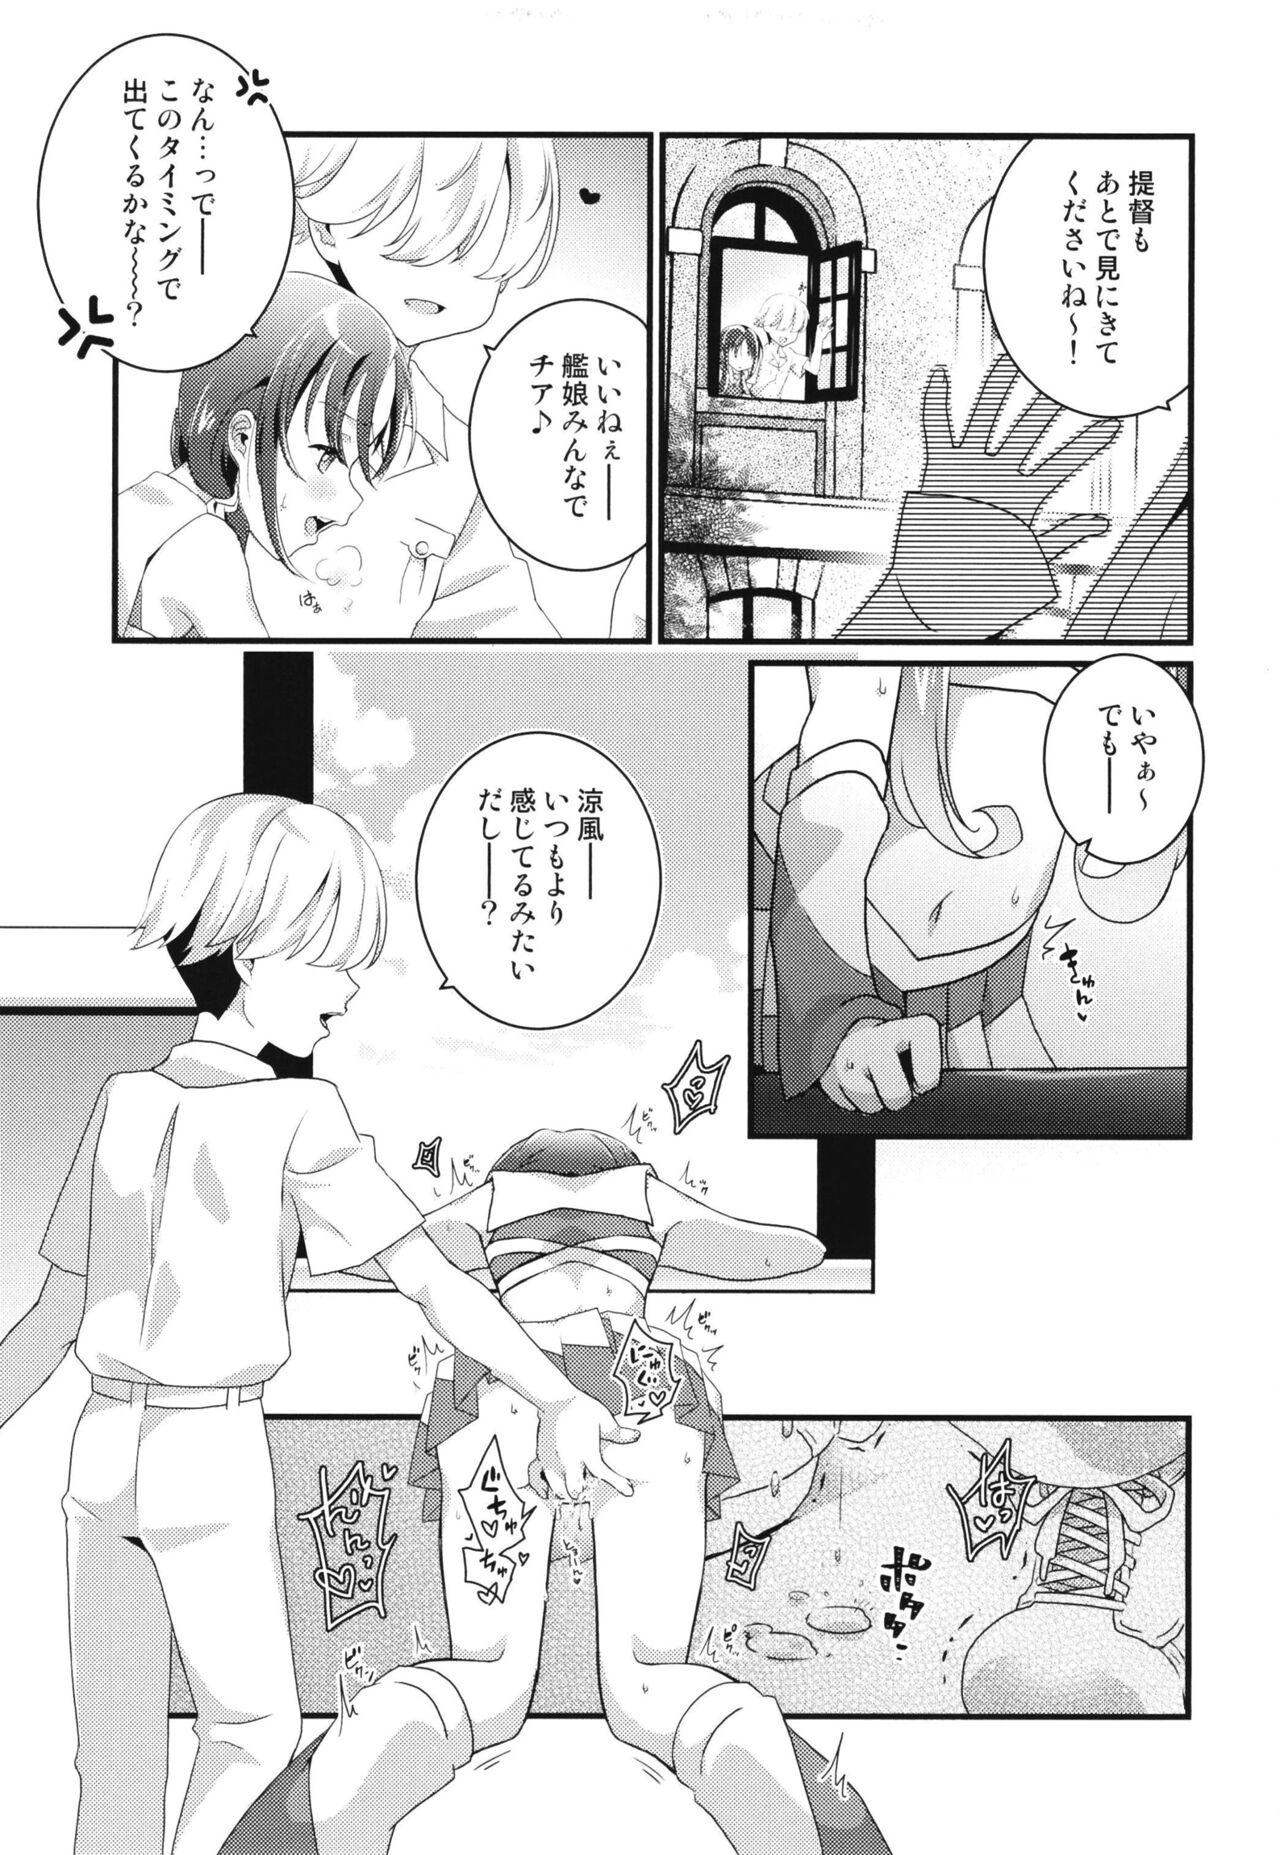 Interview Yah! Cheer! yeah! - Kantai collection Twistys - Page 5